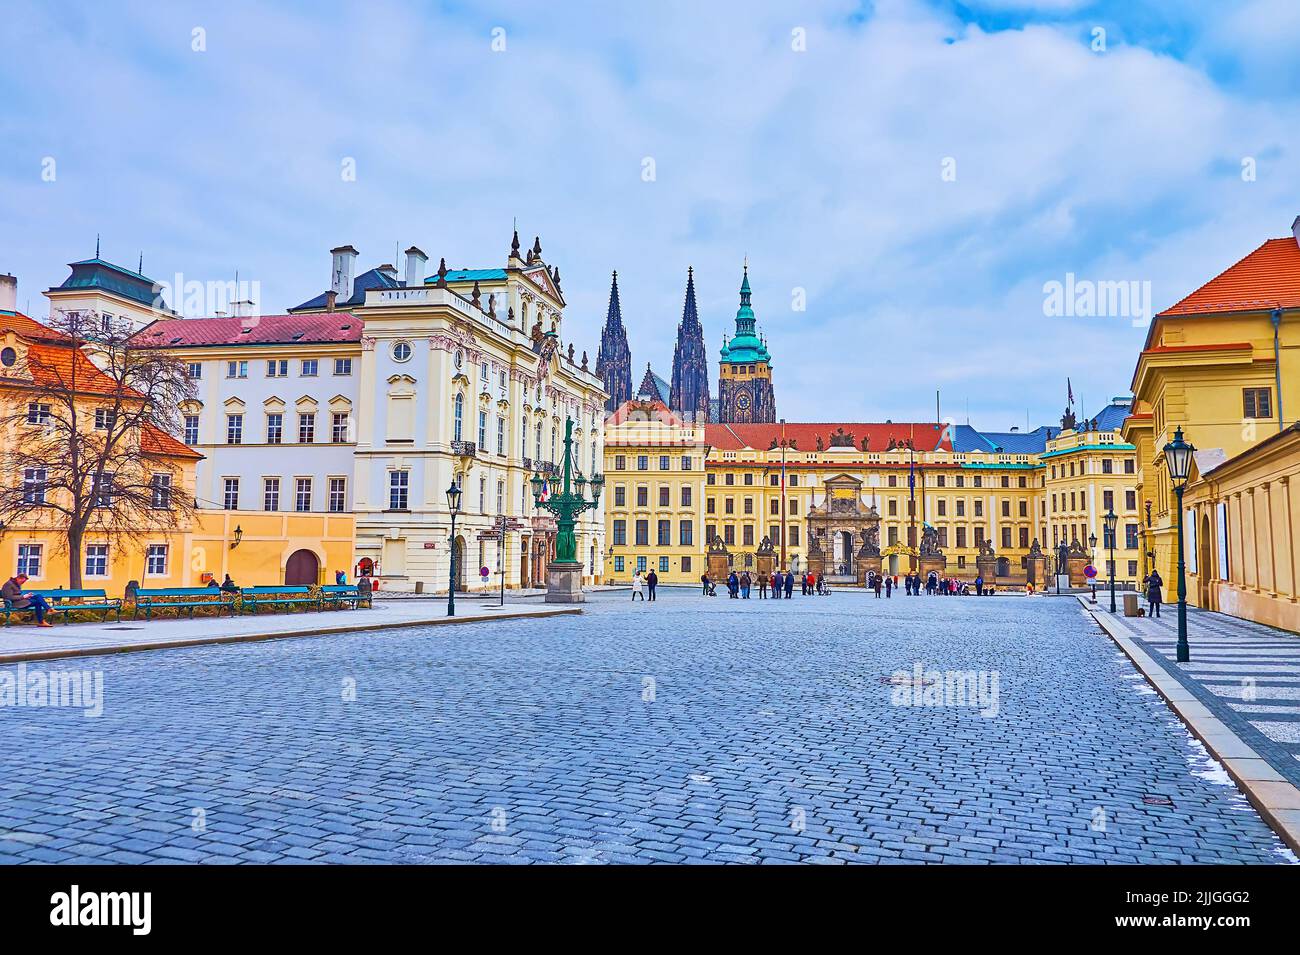 Architectural ensemble of Castle Square in Hradcany with Archbishop's Palace and New Royal Palace of Prague Castle with St Vitus Cathedral's towers in Stock Photo